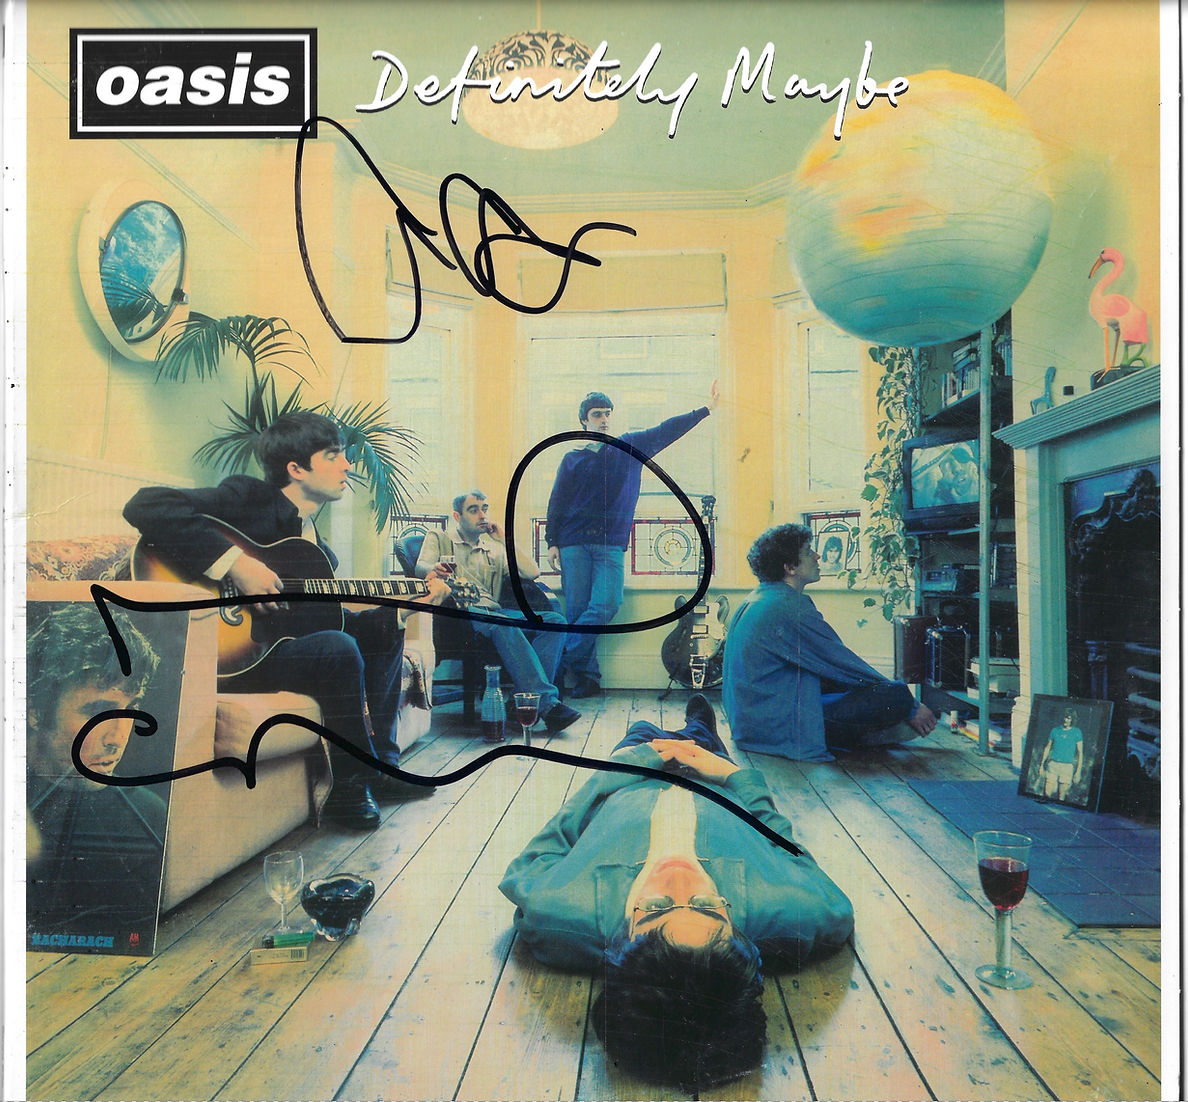 LIAM GALLAGHER NOEL GALLAGHER SIGNED DEFINITELY MAYBE OASIS LP (AFTAL WITNESSED COA)